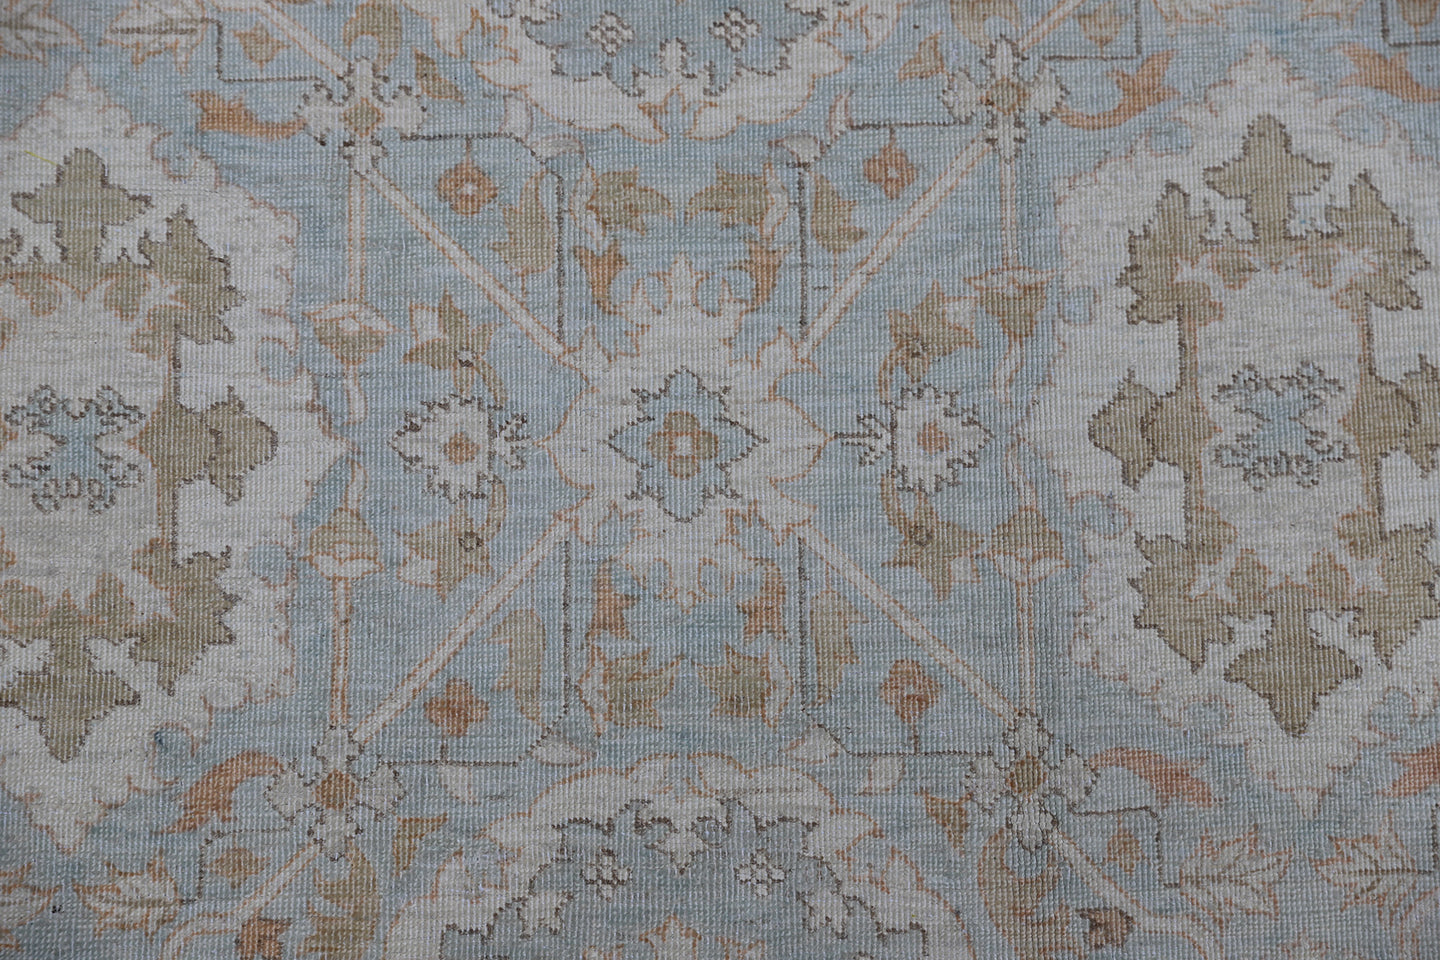 9.08 x  8.00 Finely Hand Knotted Soft Blue and Gold Agra Design Ariana Area Rug